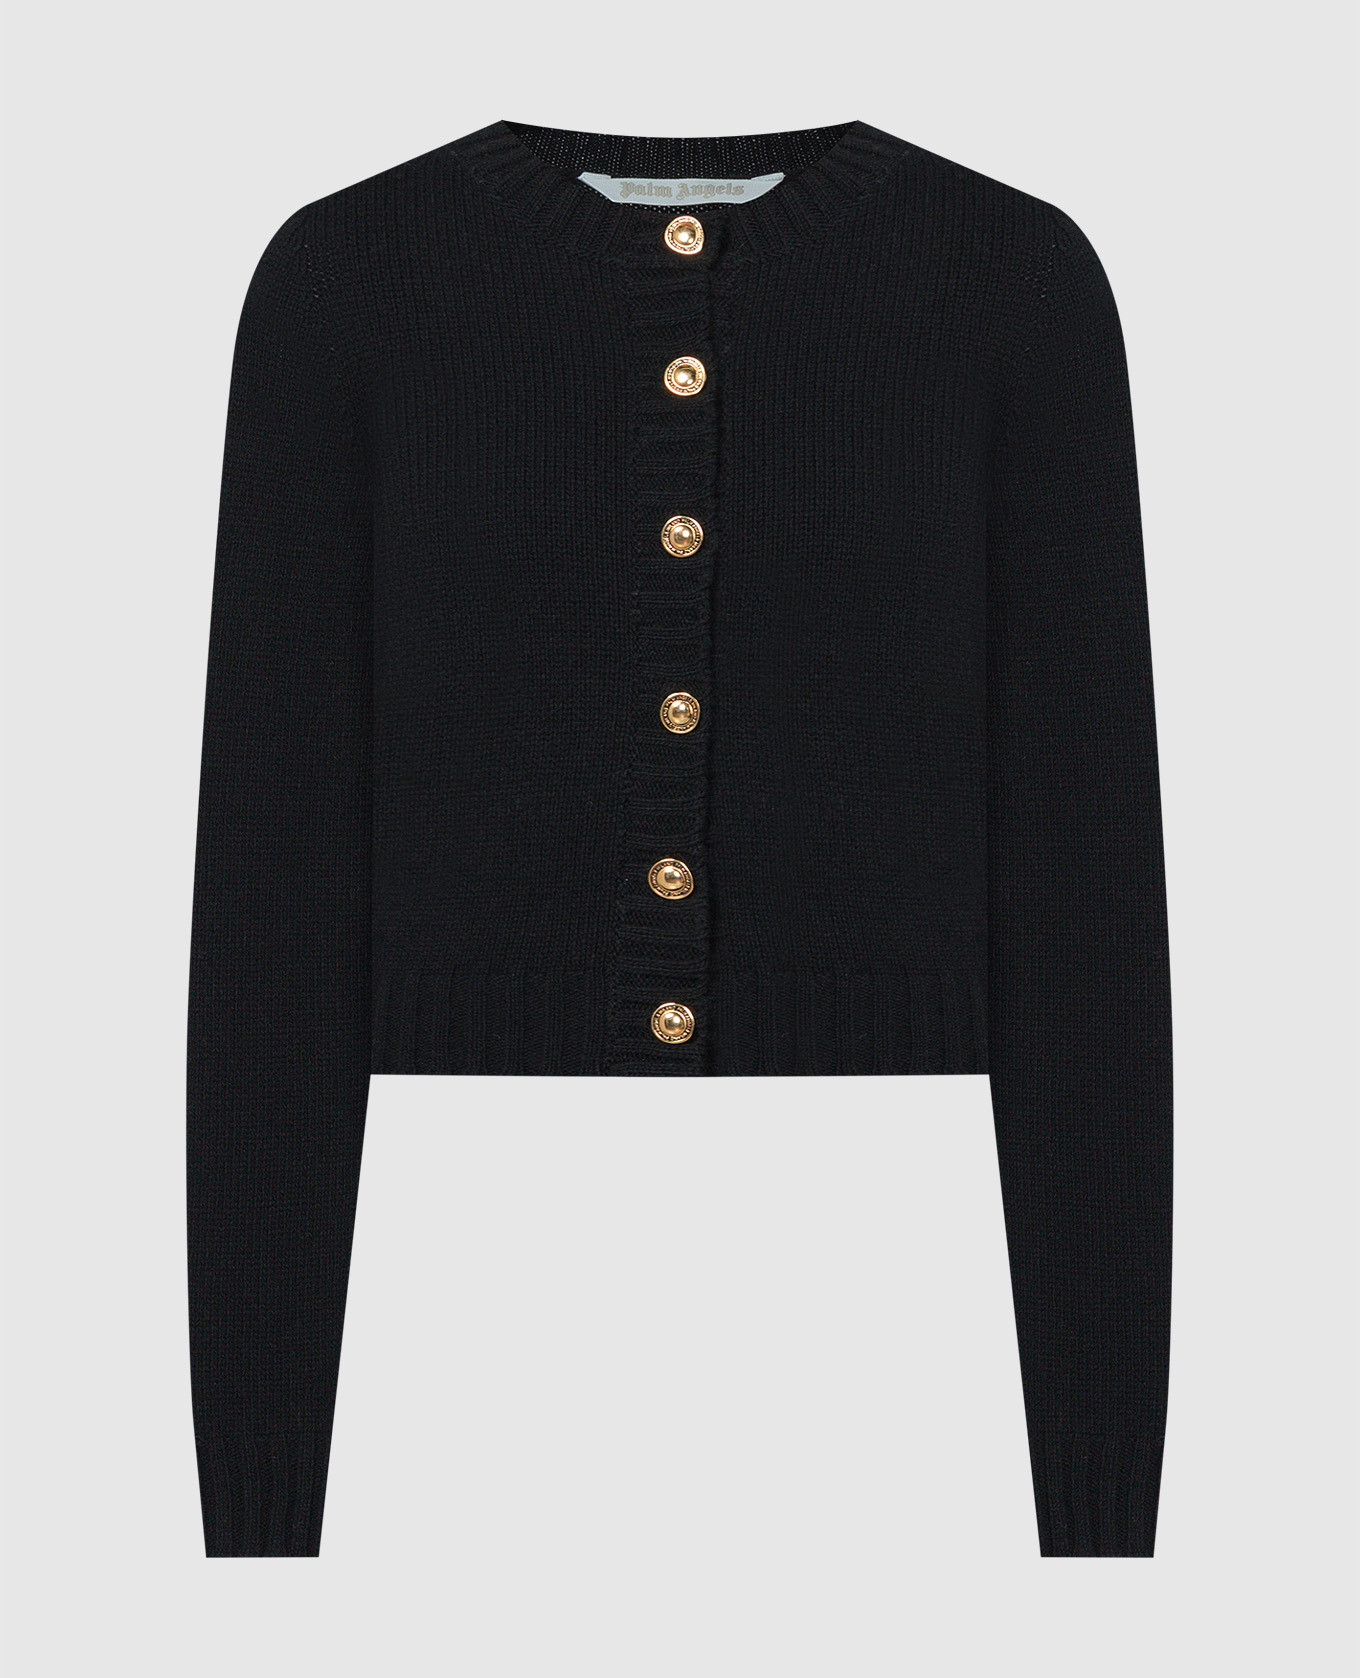 Black wool cardigan with logo embroidery